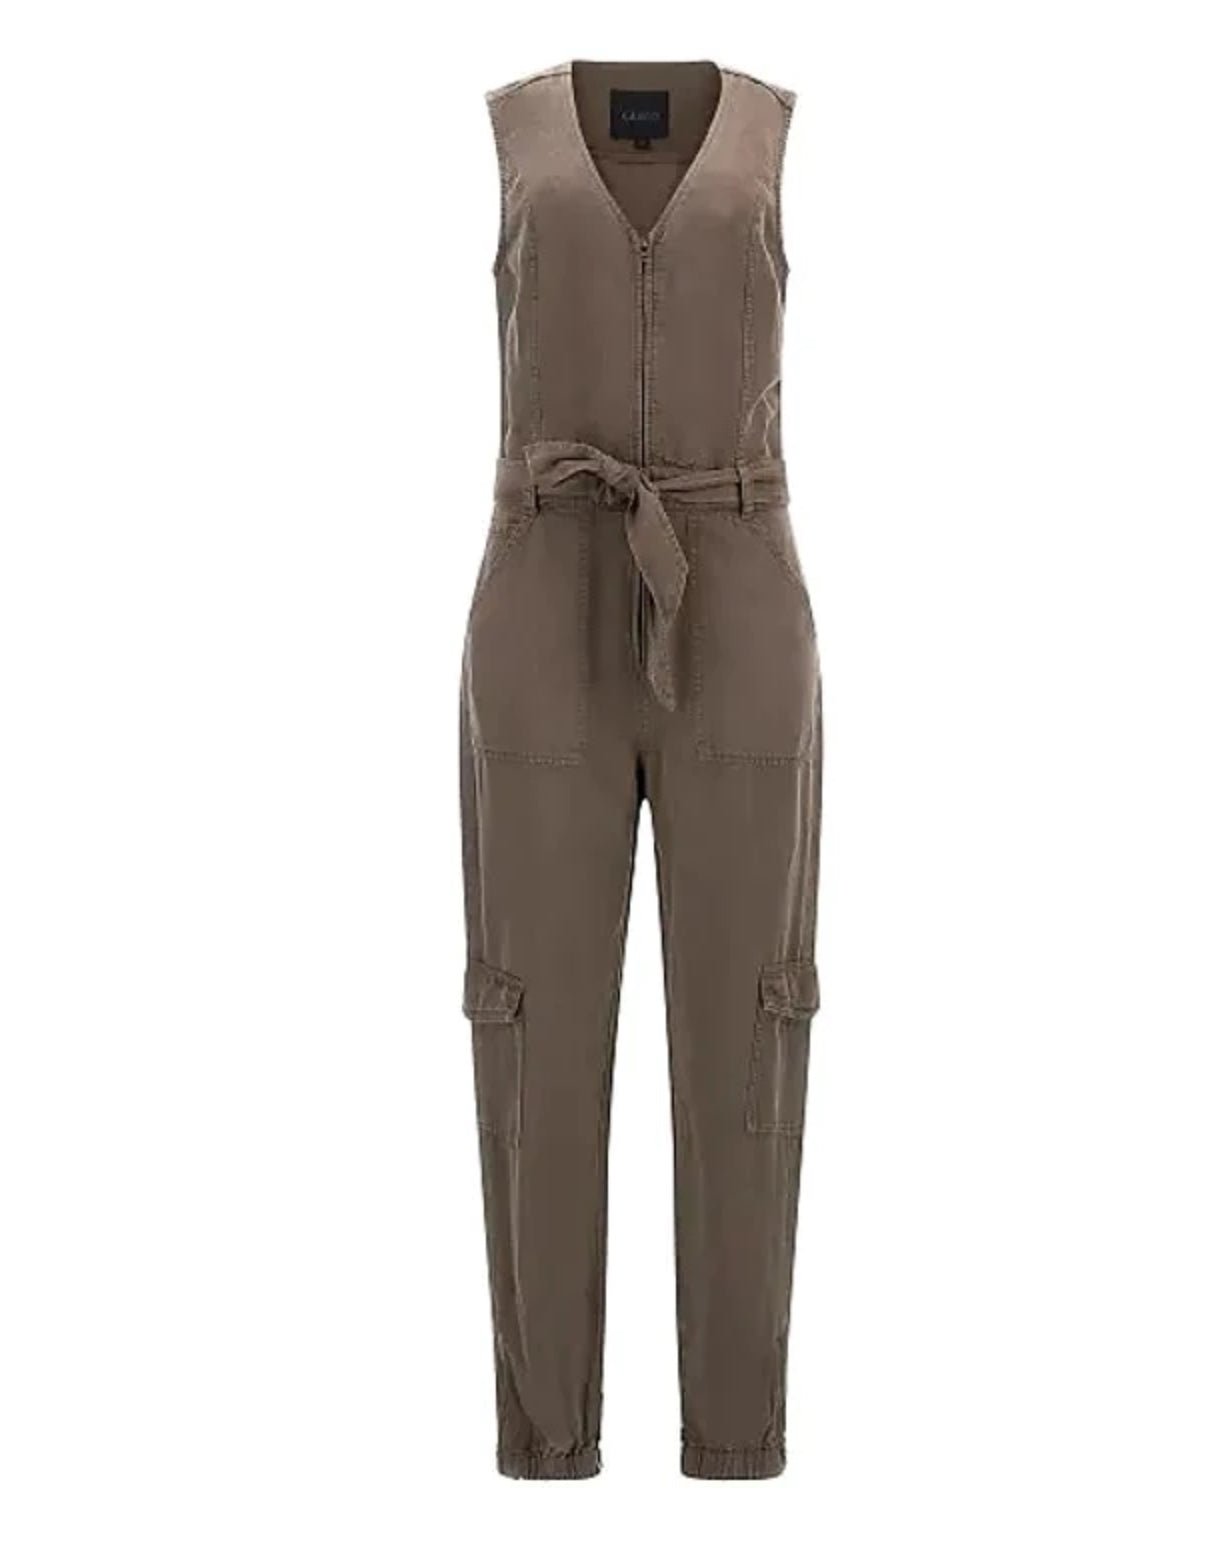 Indy Tencel Jumpsuit by Guess - Military Brown - Blue Sky Fashions & Lingerie